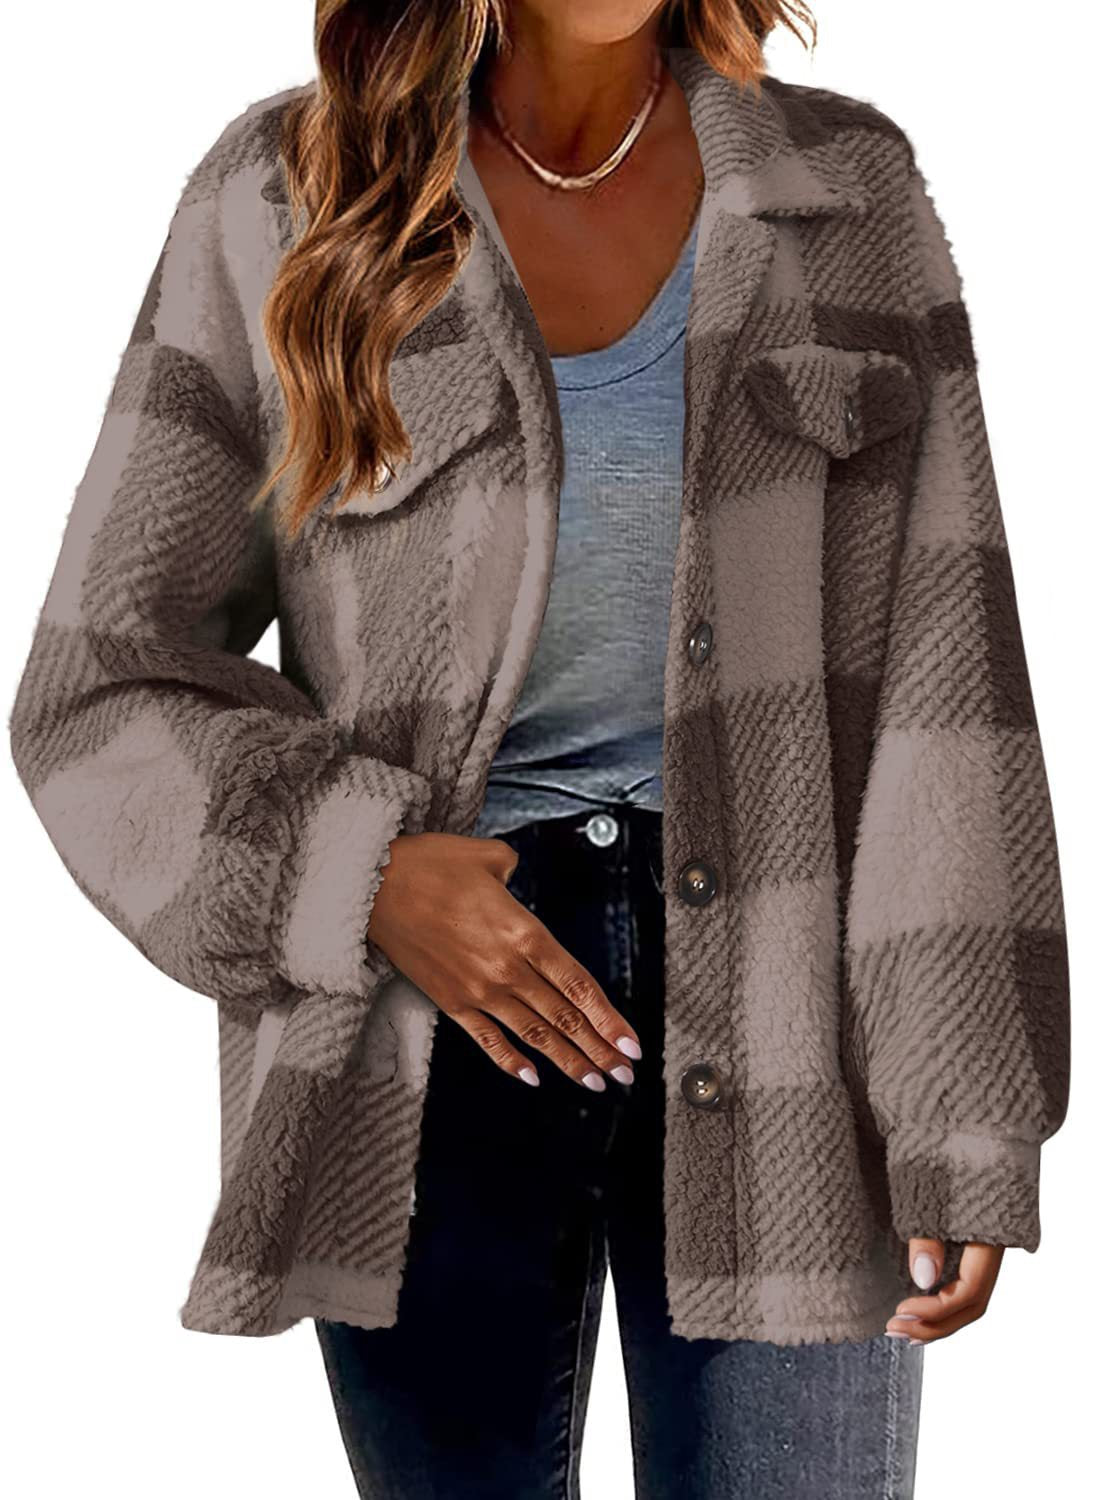 Turndown Collar Plaid Jacket With Pockets Single Breasted Button Down Woolen Jacket Autumn And Winter Clothes For Women